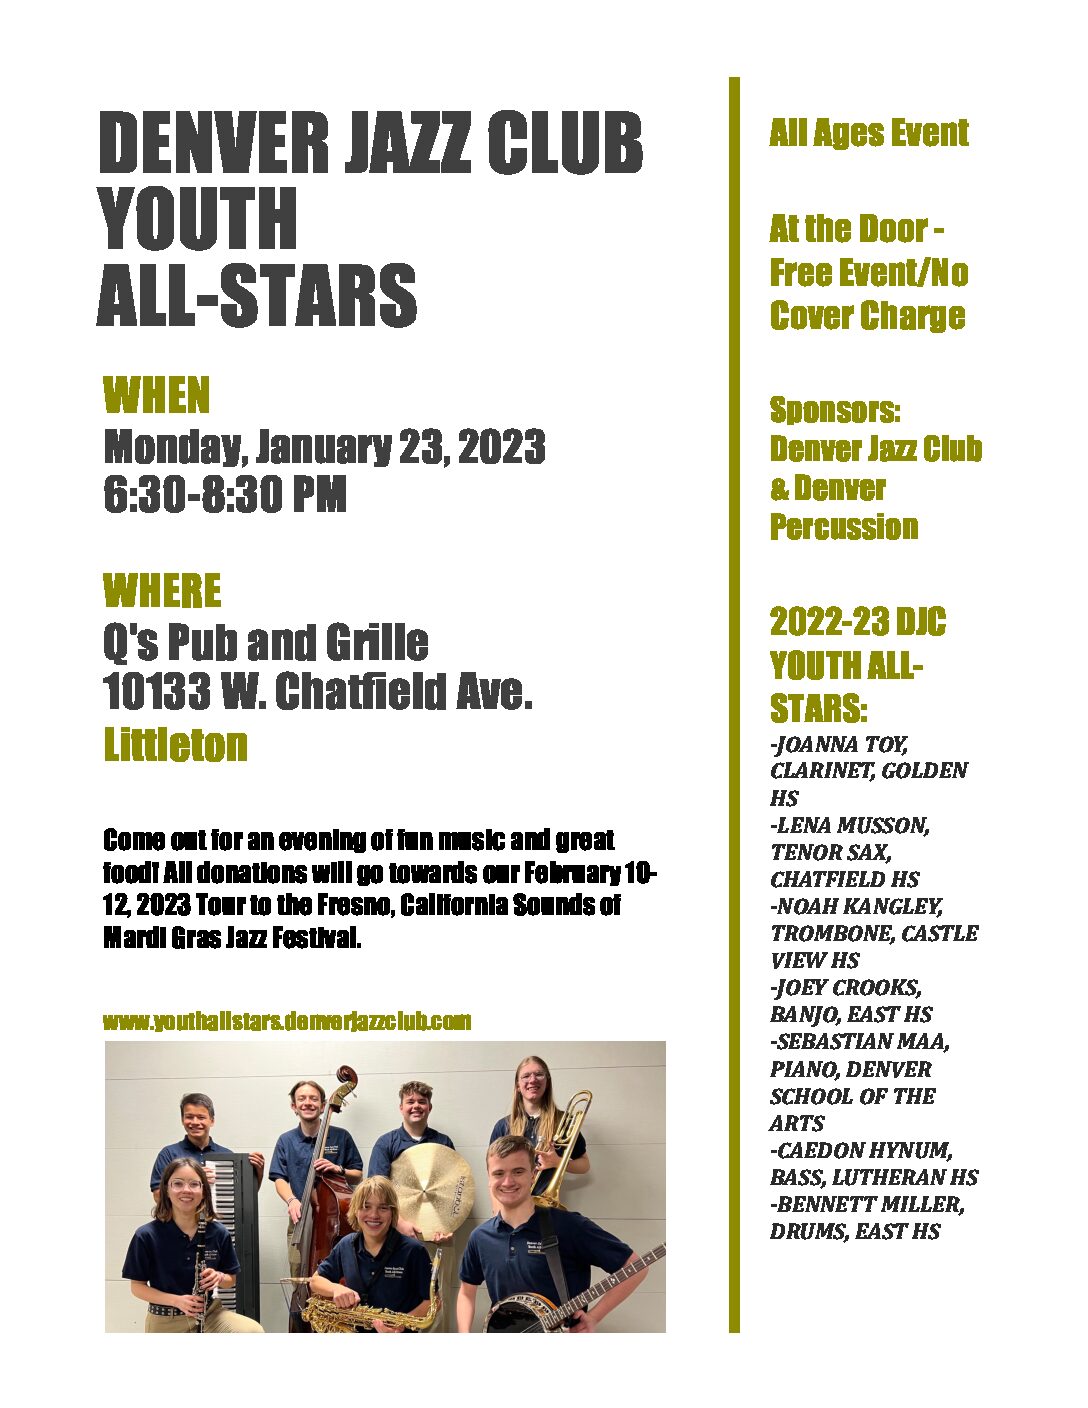 Q’s Pub and Grille to Host an Evening of Jazz with the Denver Jazz Club Youth All-Stars on Monday, January 23rd